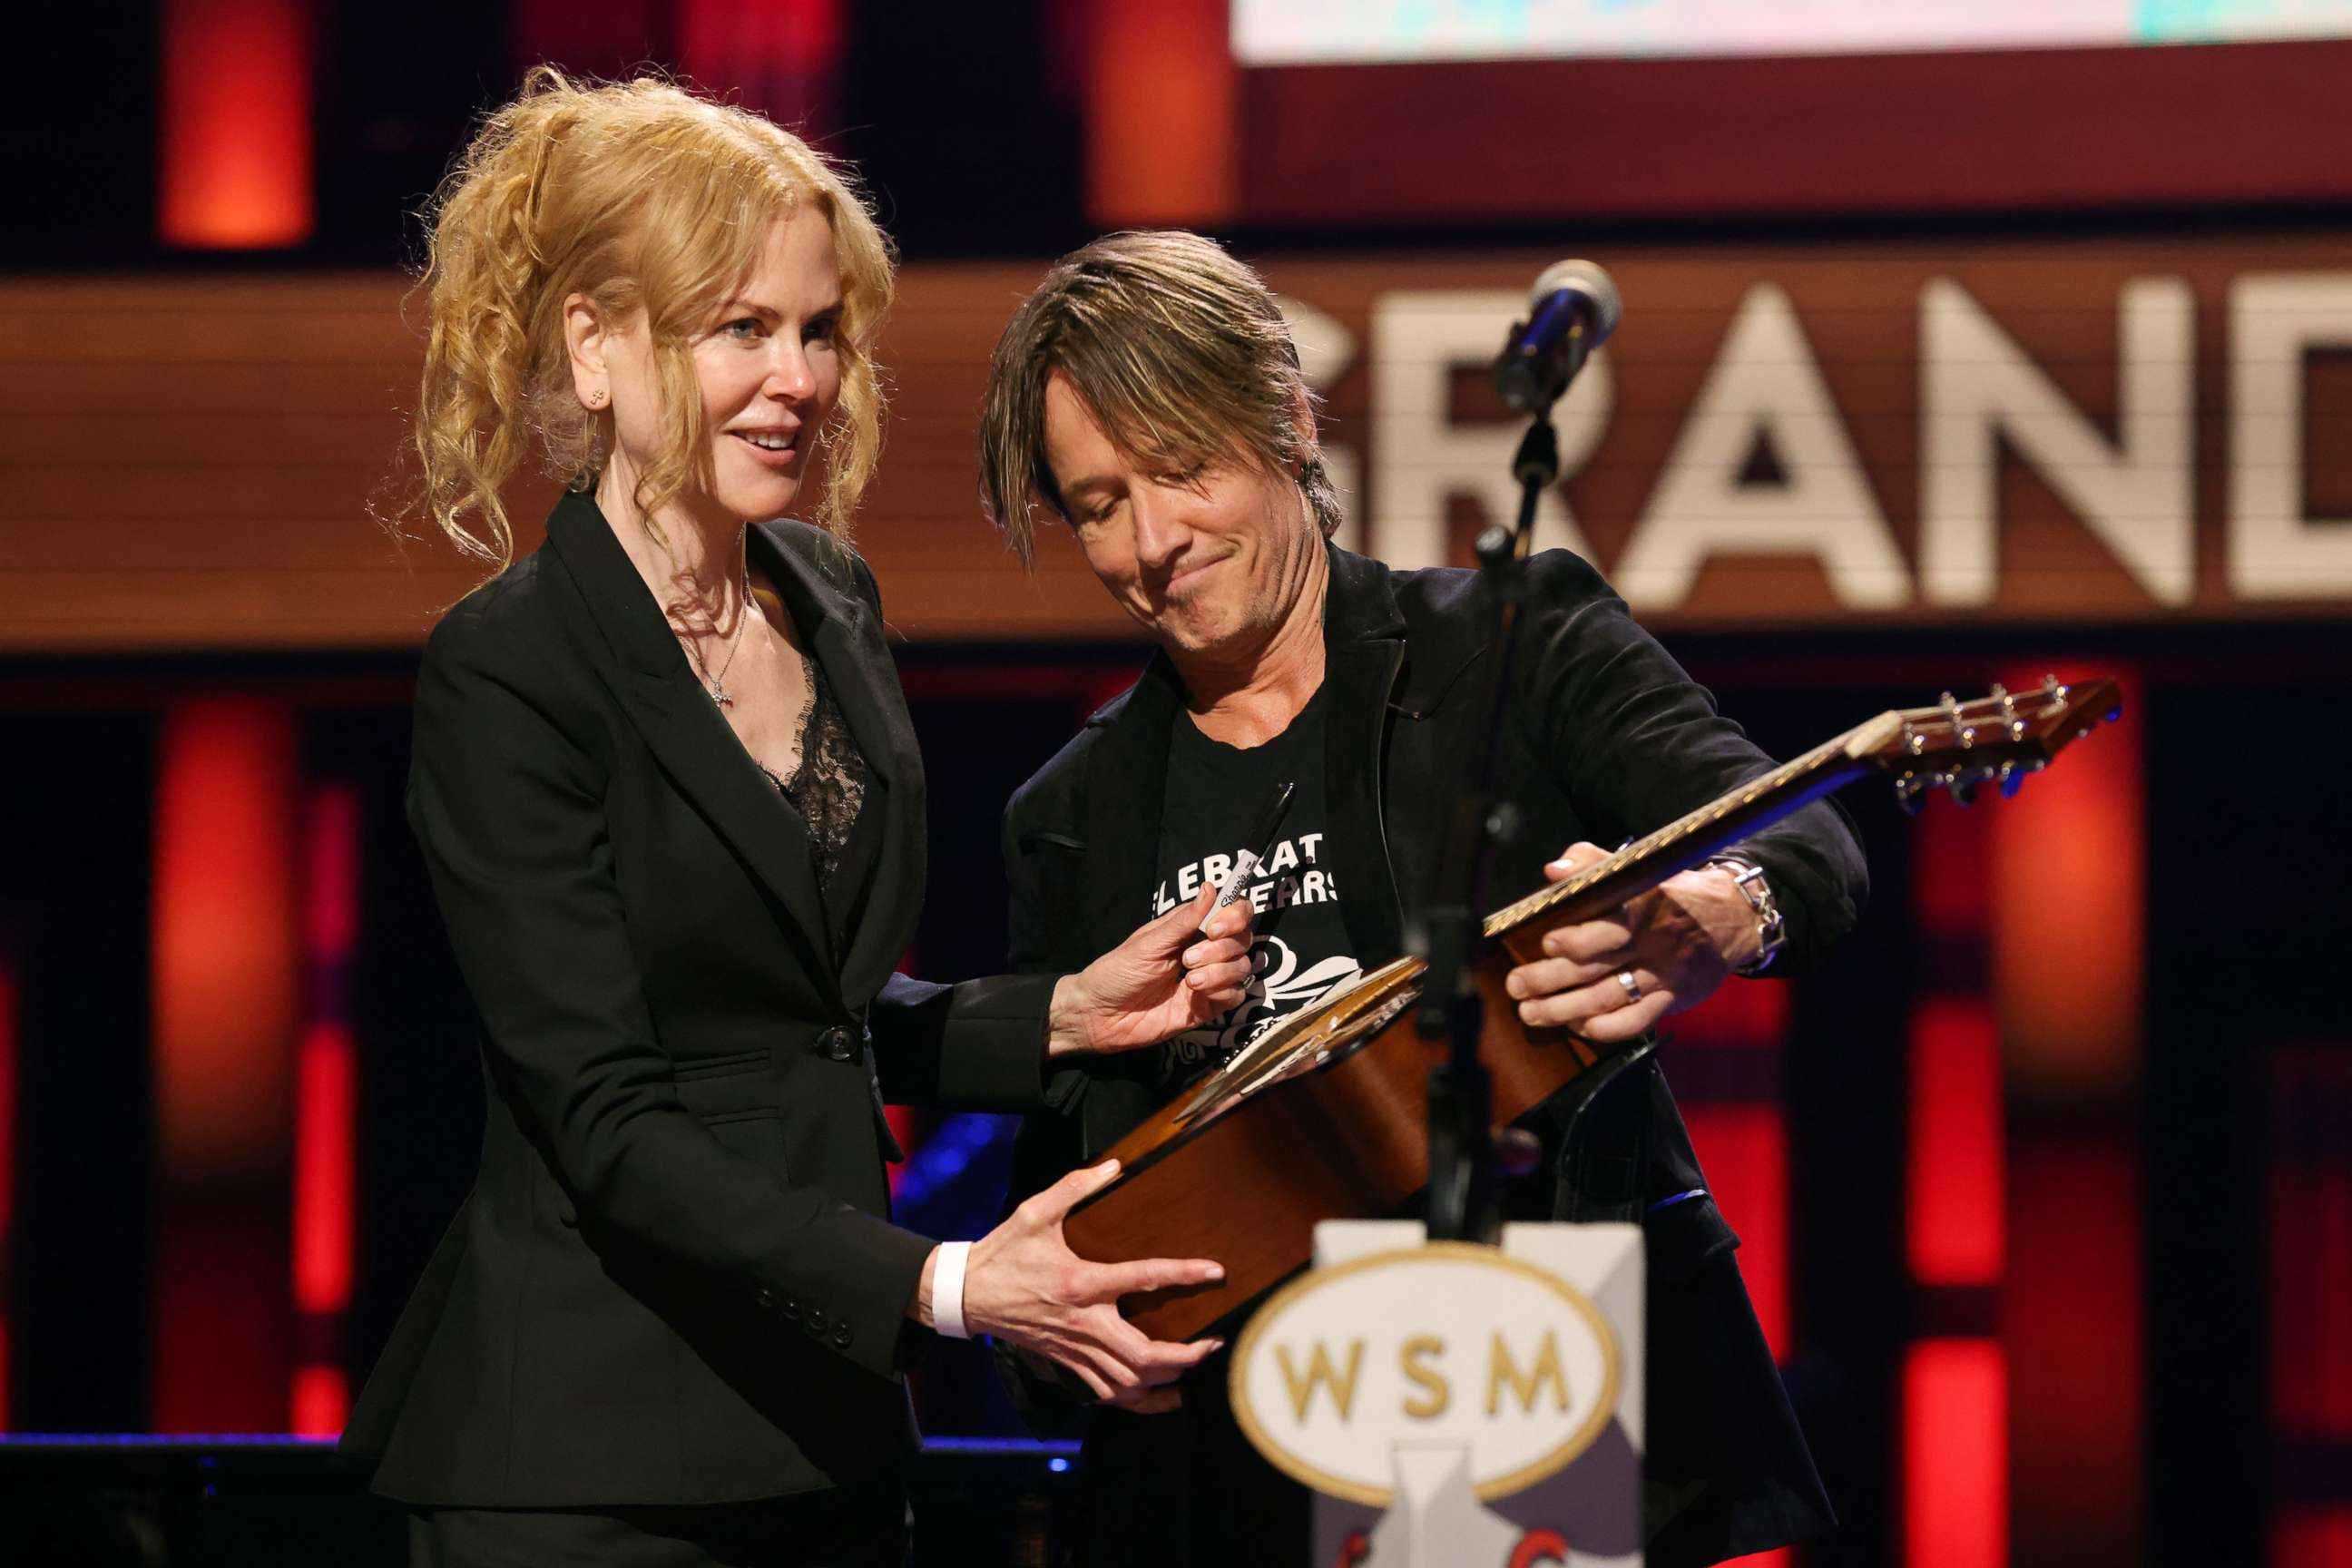 PHOTO: Nicole Kidman joins her husband Keith Urban on stage at a benefit concert in Nashville, Sep 13, 2021.